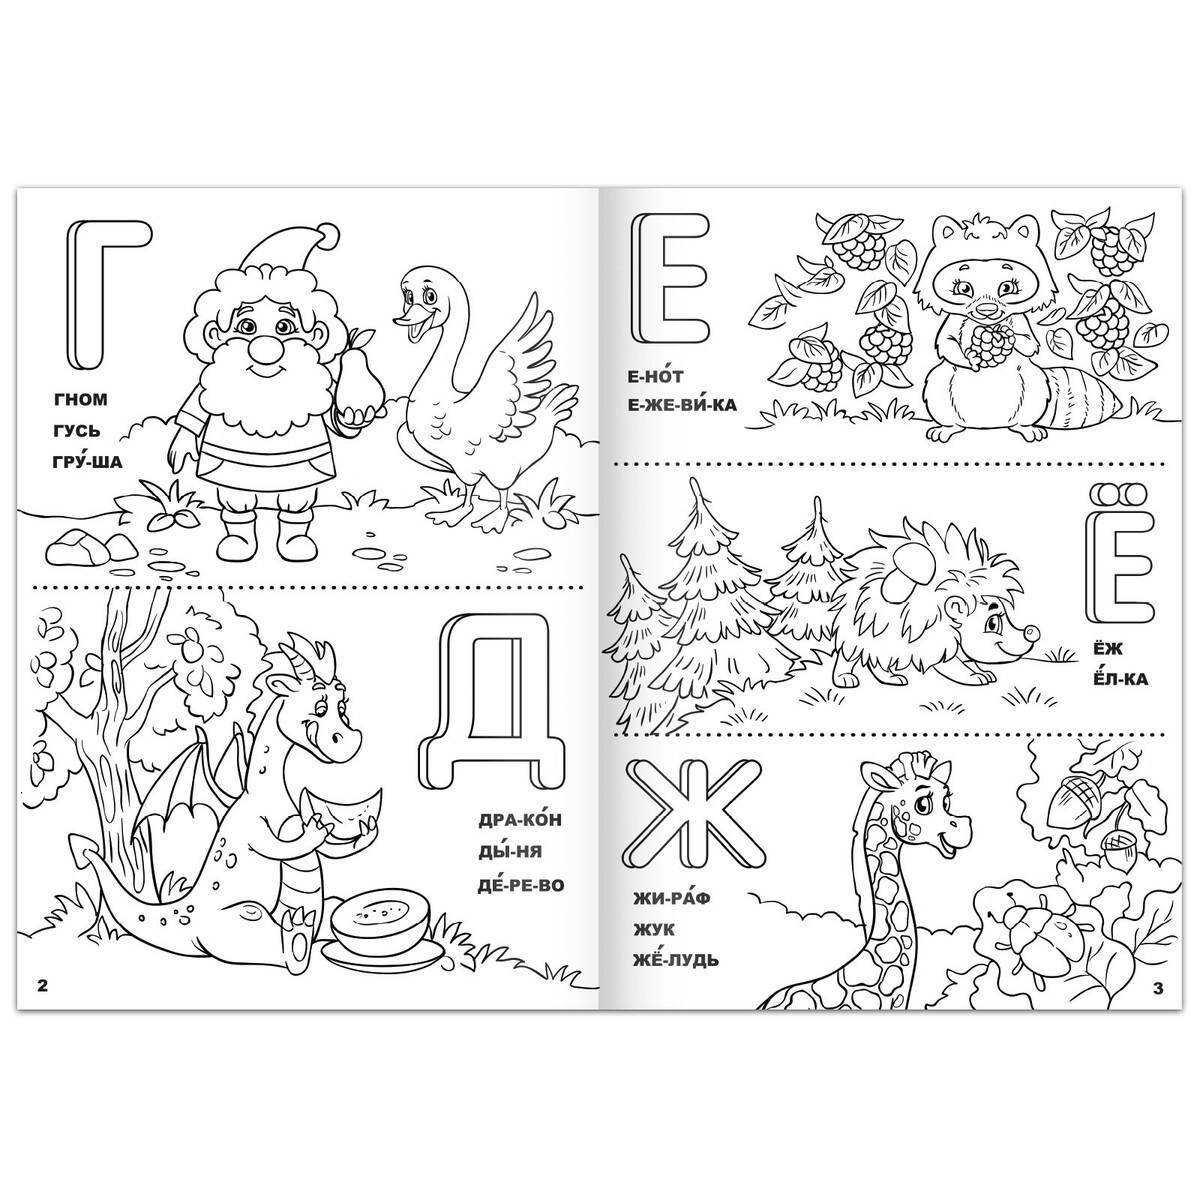 Glowing alphabet coloring book